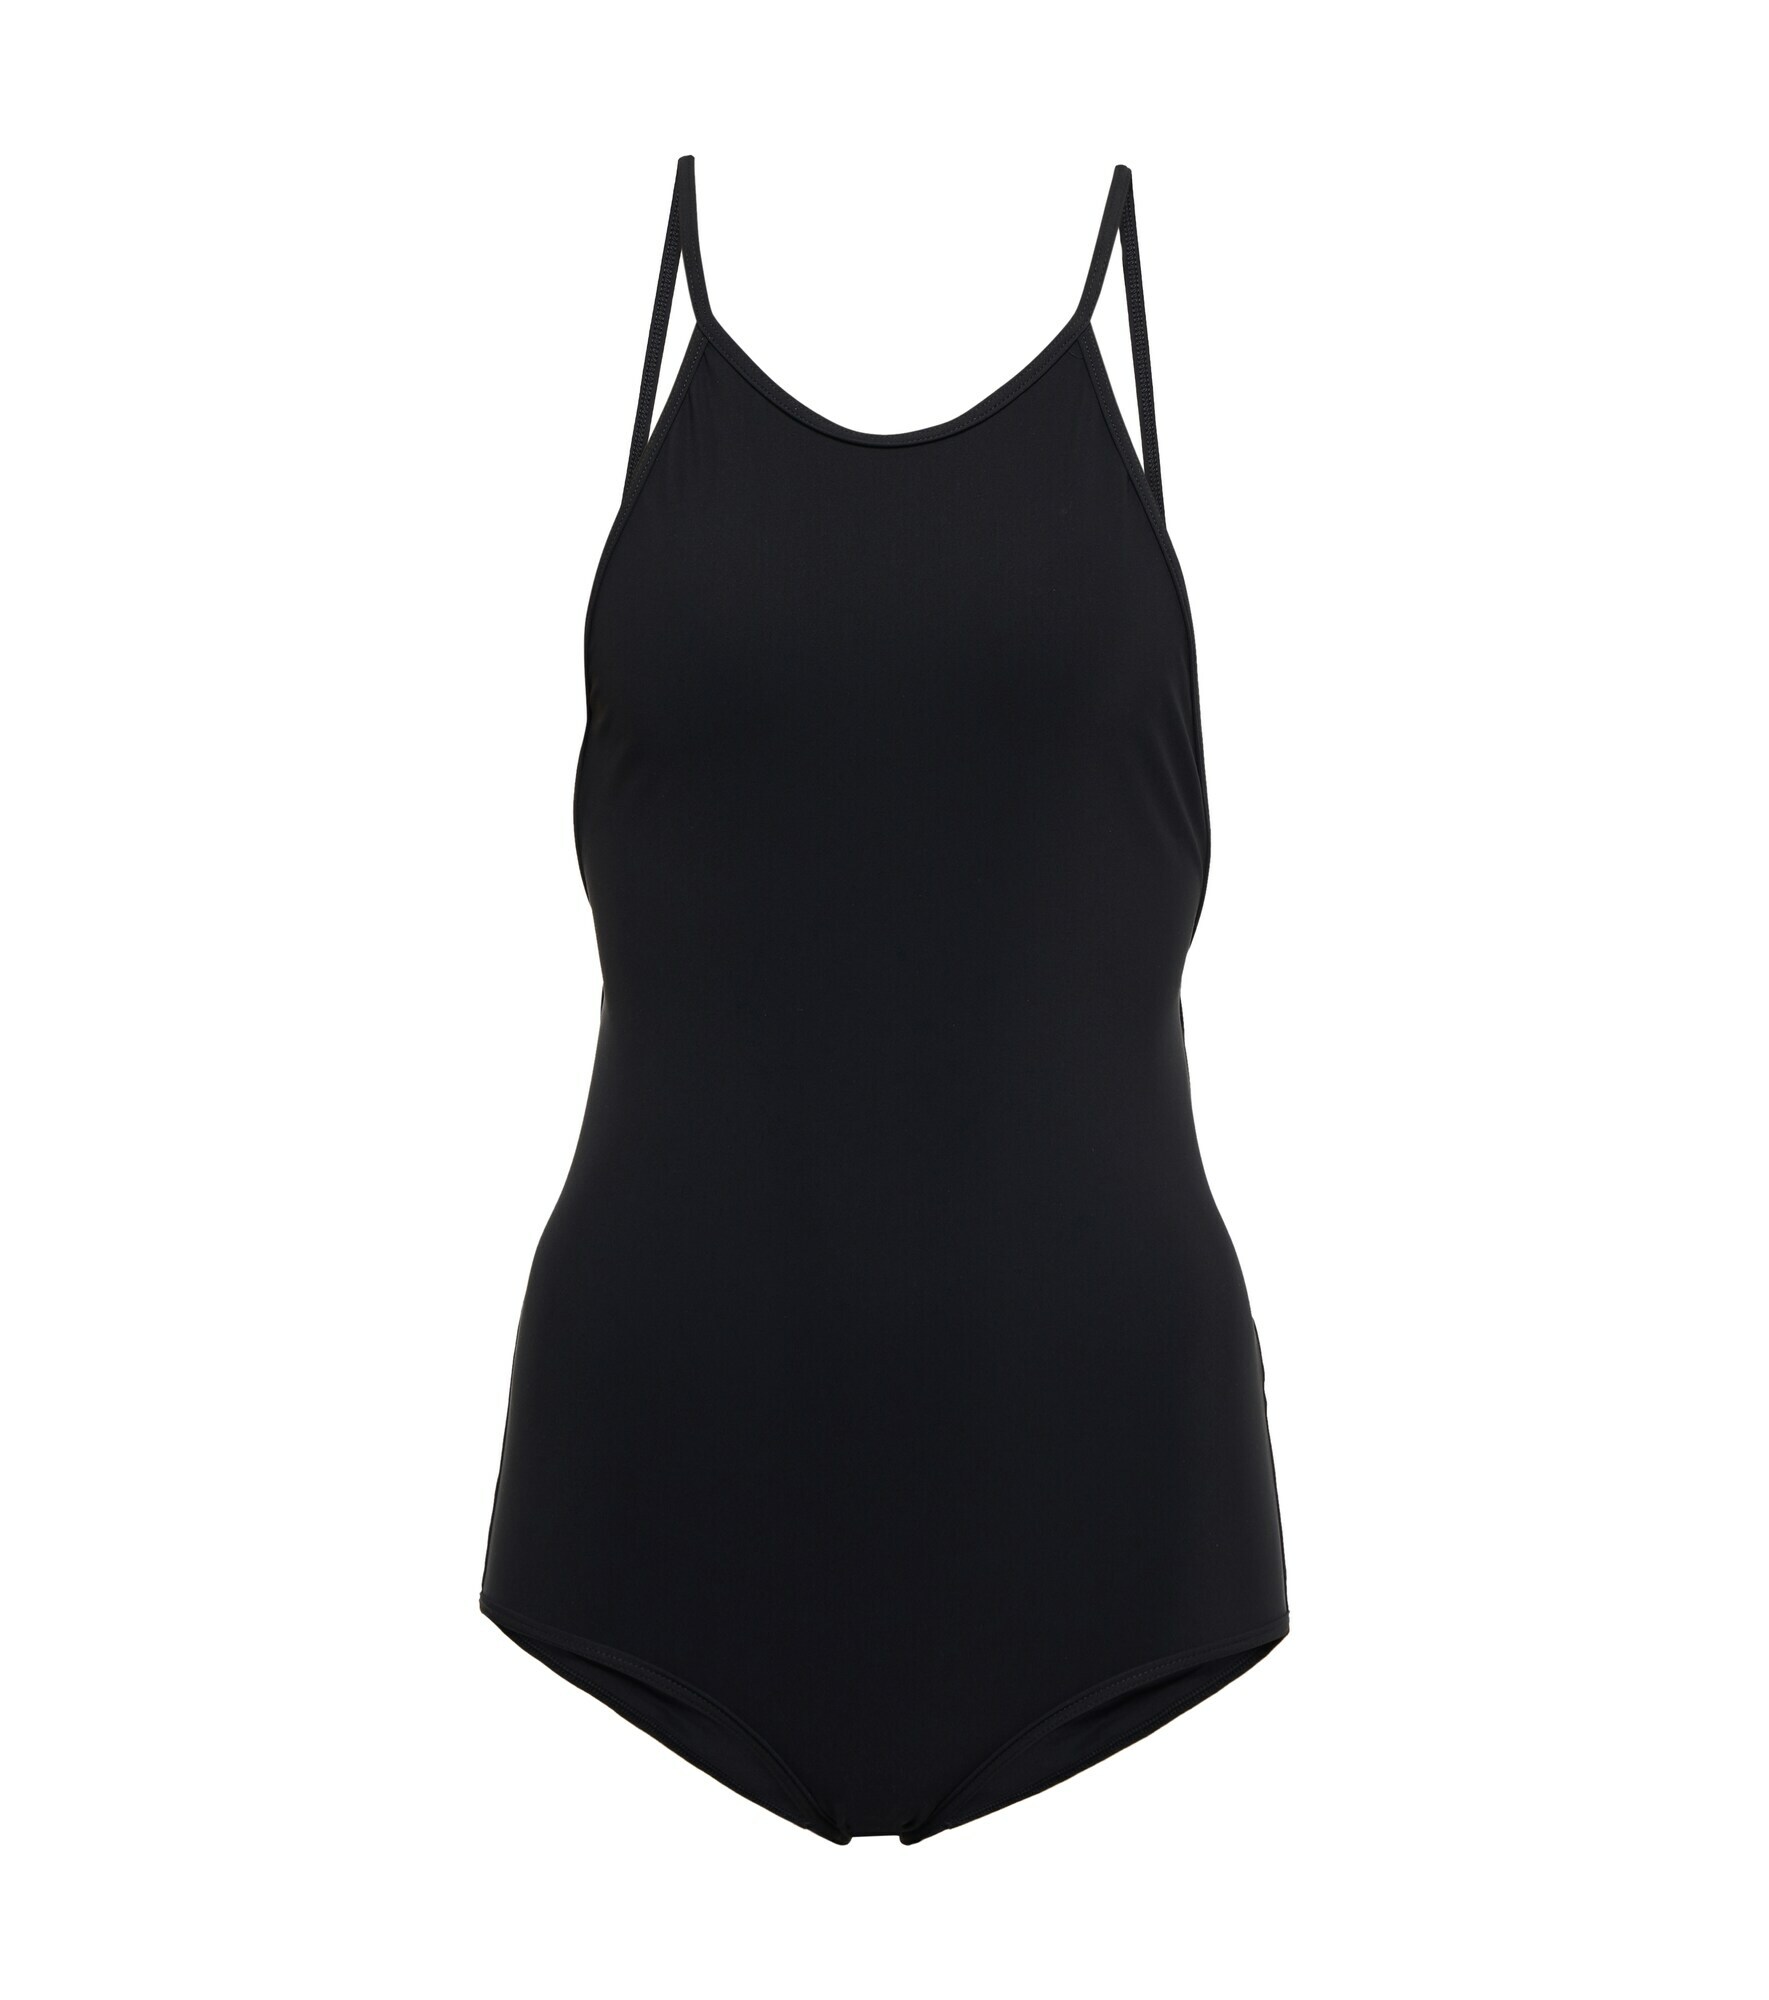 Toteme - One-piece swimsuit Toteme